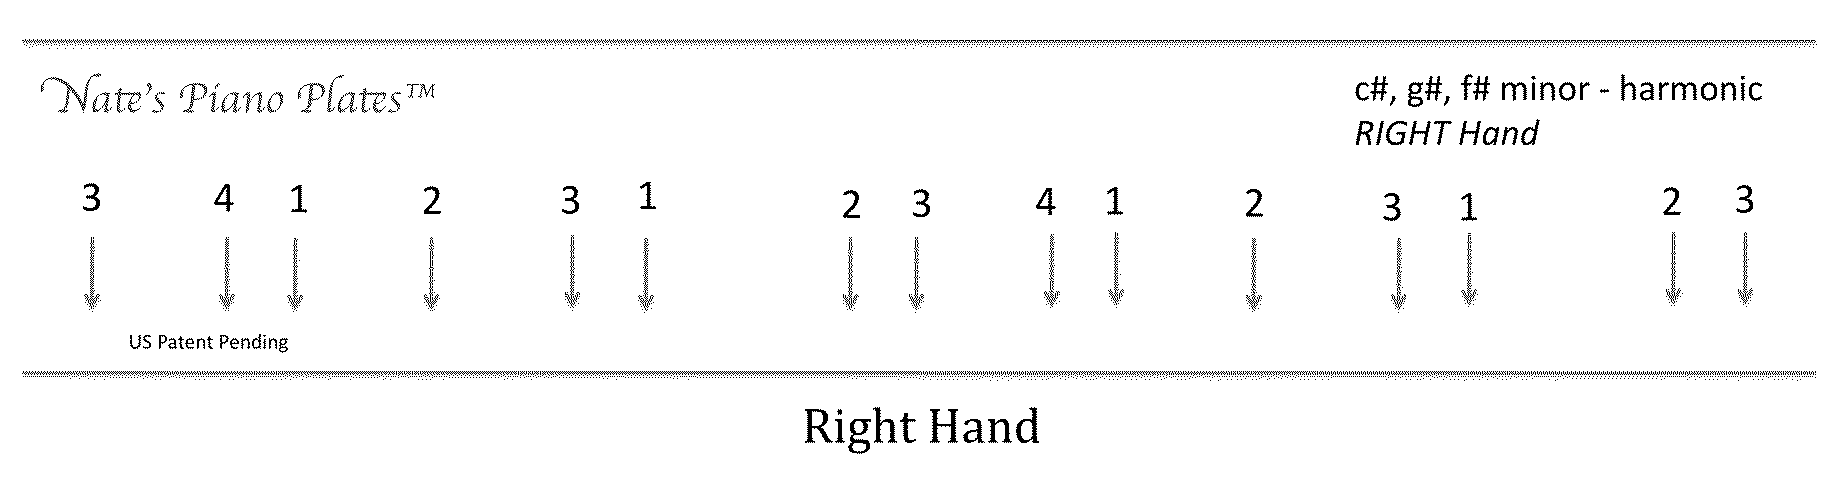 Easy visual training templates to teach piano scale fingering sequences